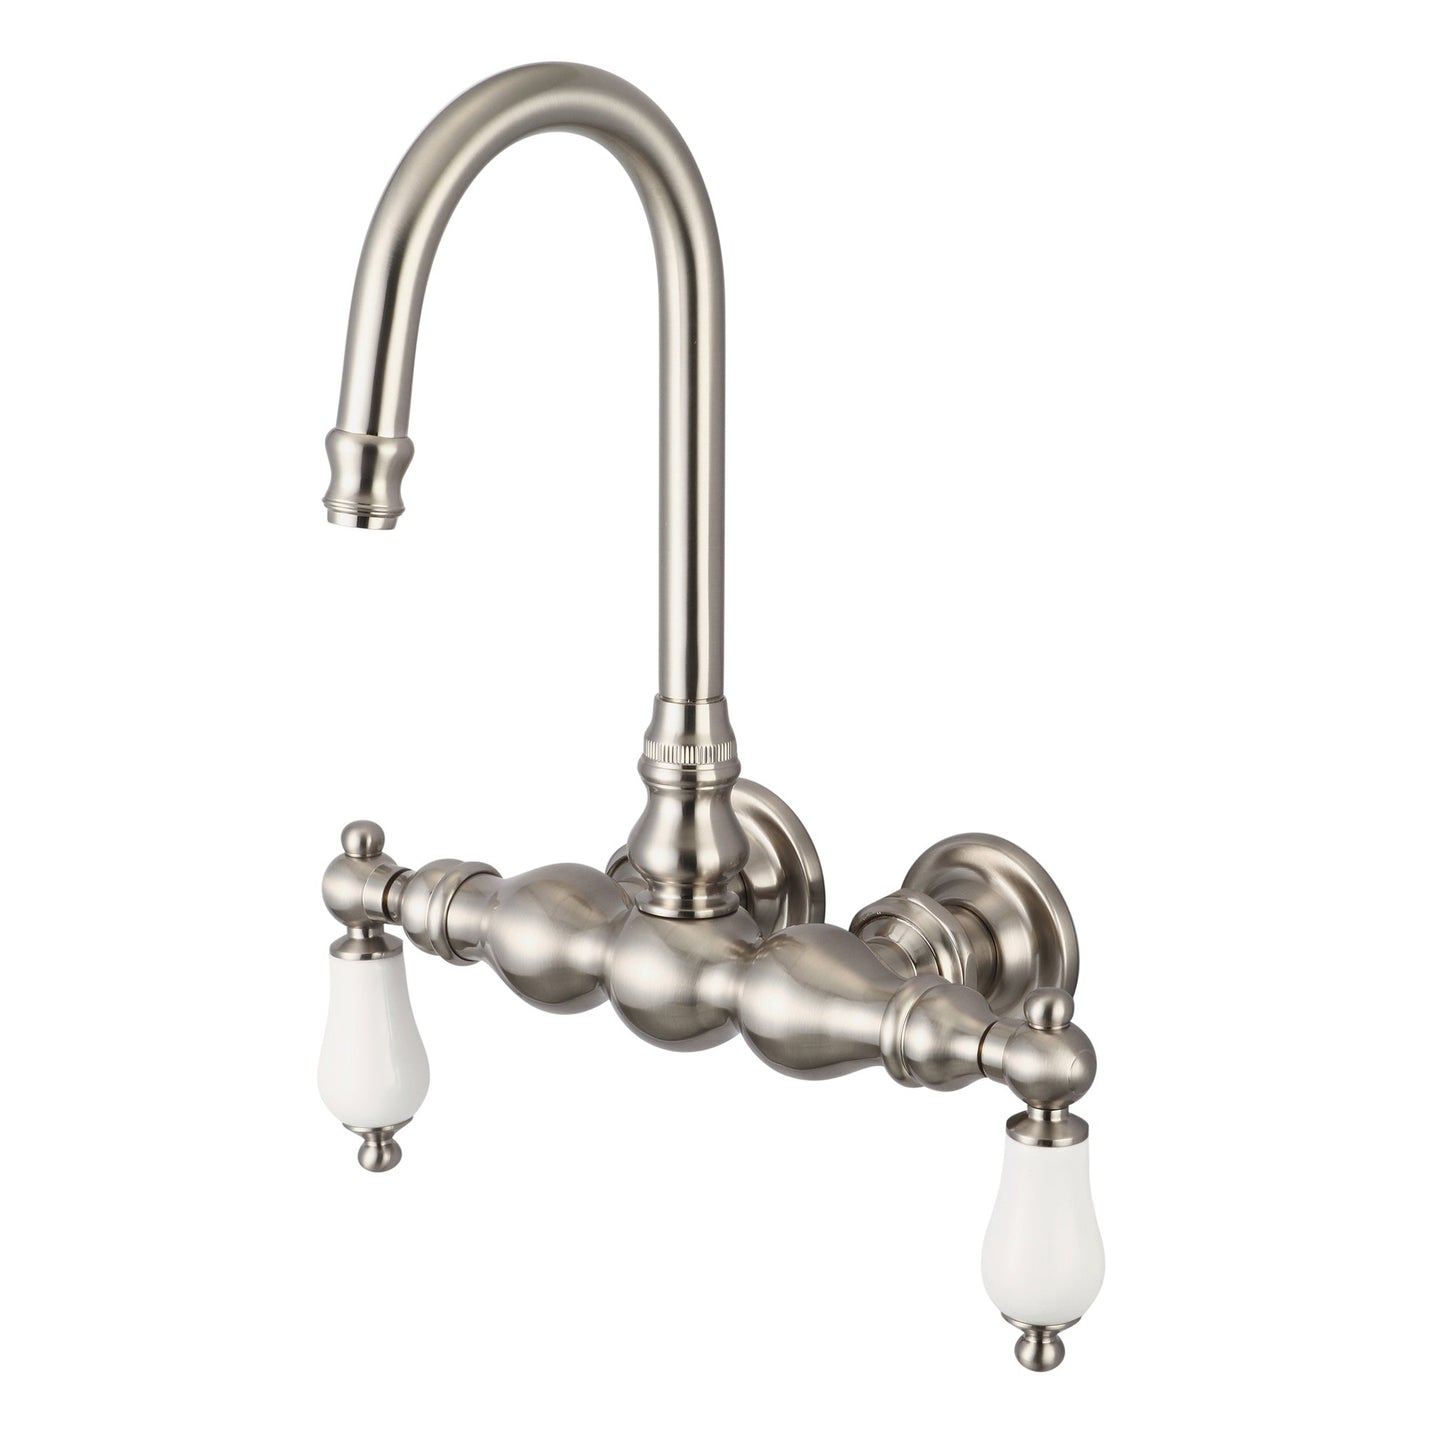 Water Creation Vintage Classic Center Wall Mount Tub F6-0014 9.25" Grey Solid Brass Faucet With Gooseneck Spout And Straight Wall Connector And Porcelain Lever Handles Without Labels